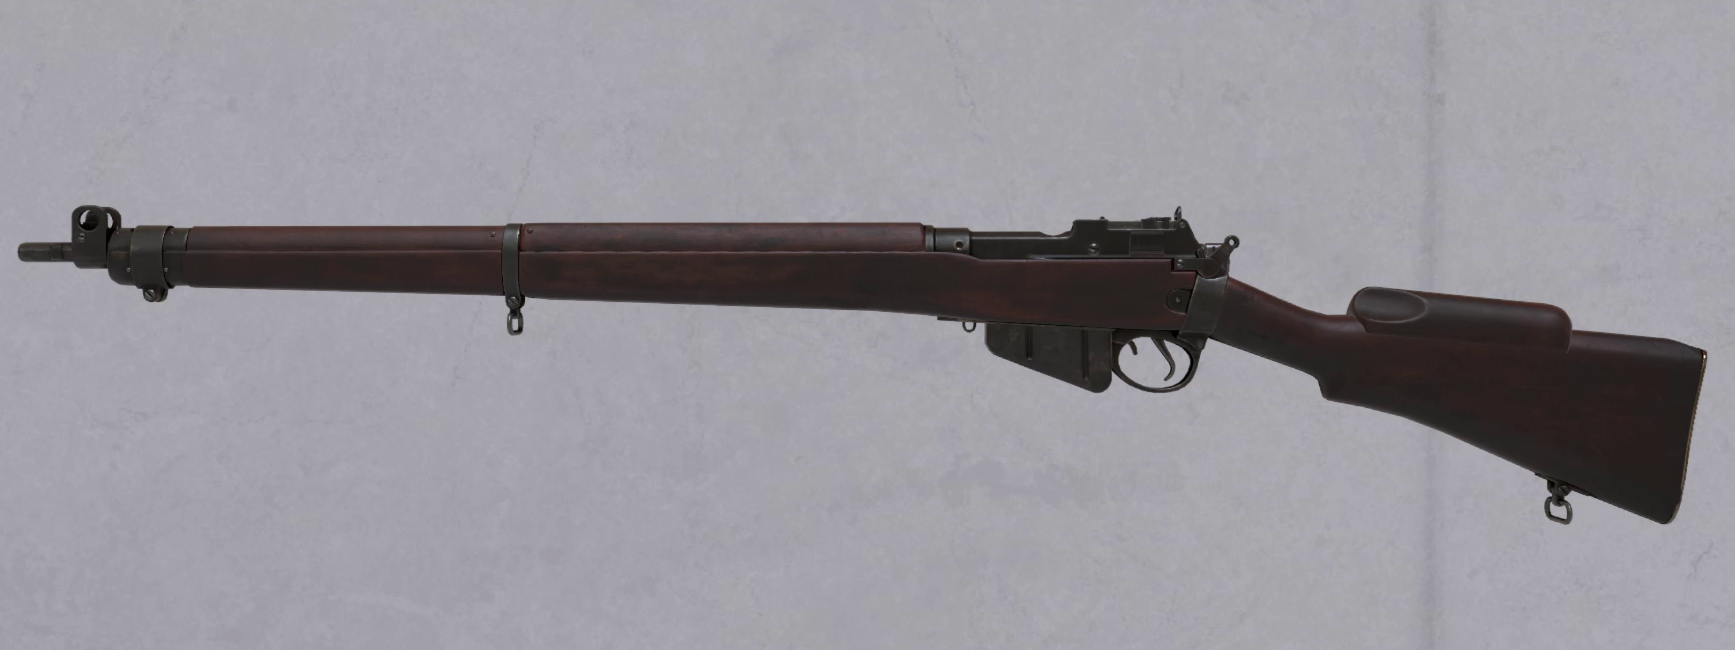 Lee-Enfield rifle, No. 4 Mark I (T)  Collections Online - Museum of New  Zealand Te Papa Tongarewa